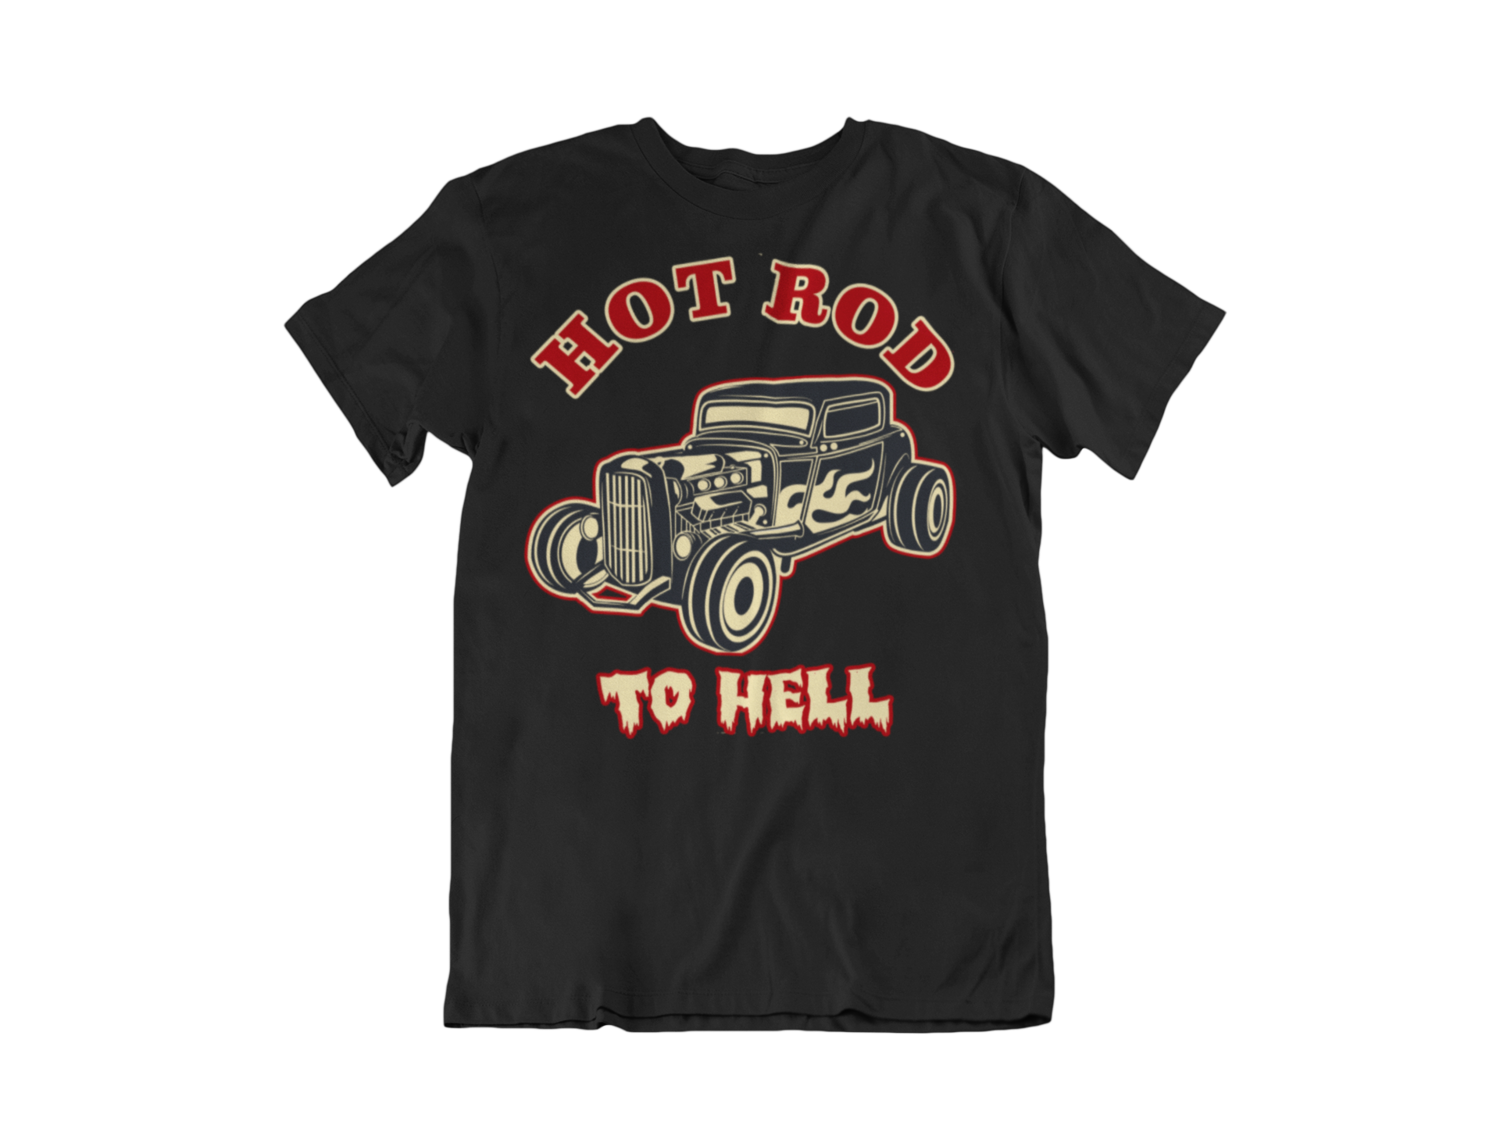 HOT ROD TO HELL T-SHIRT FOR MEN